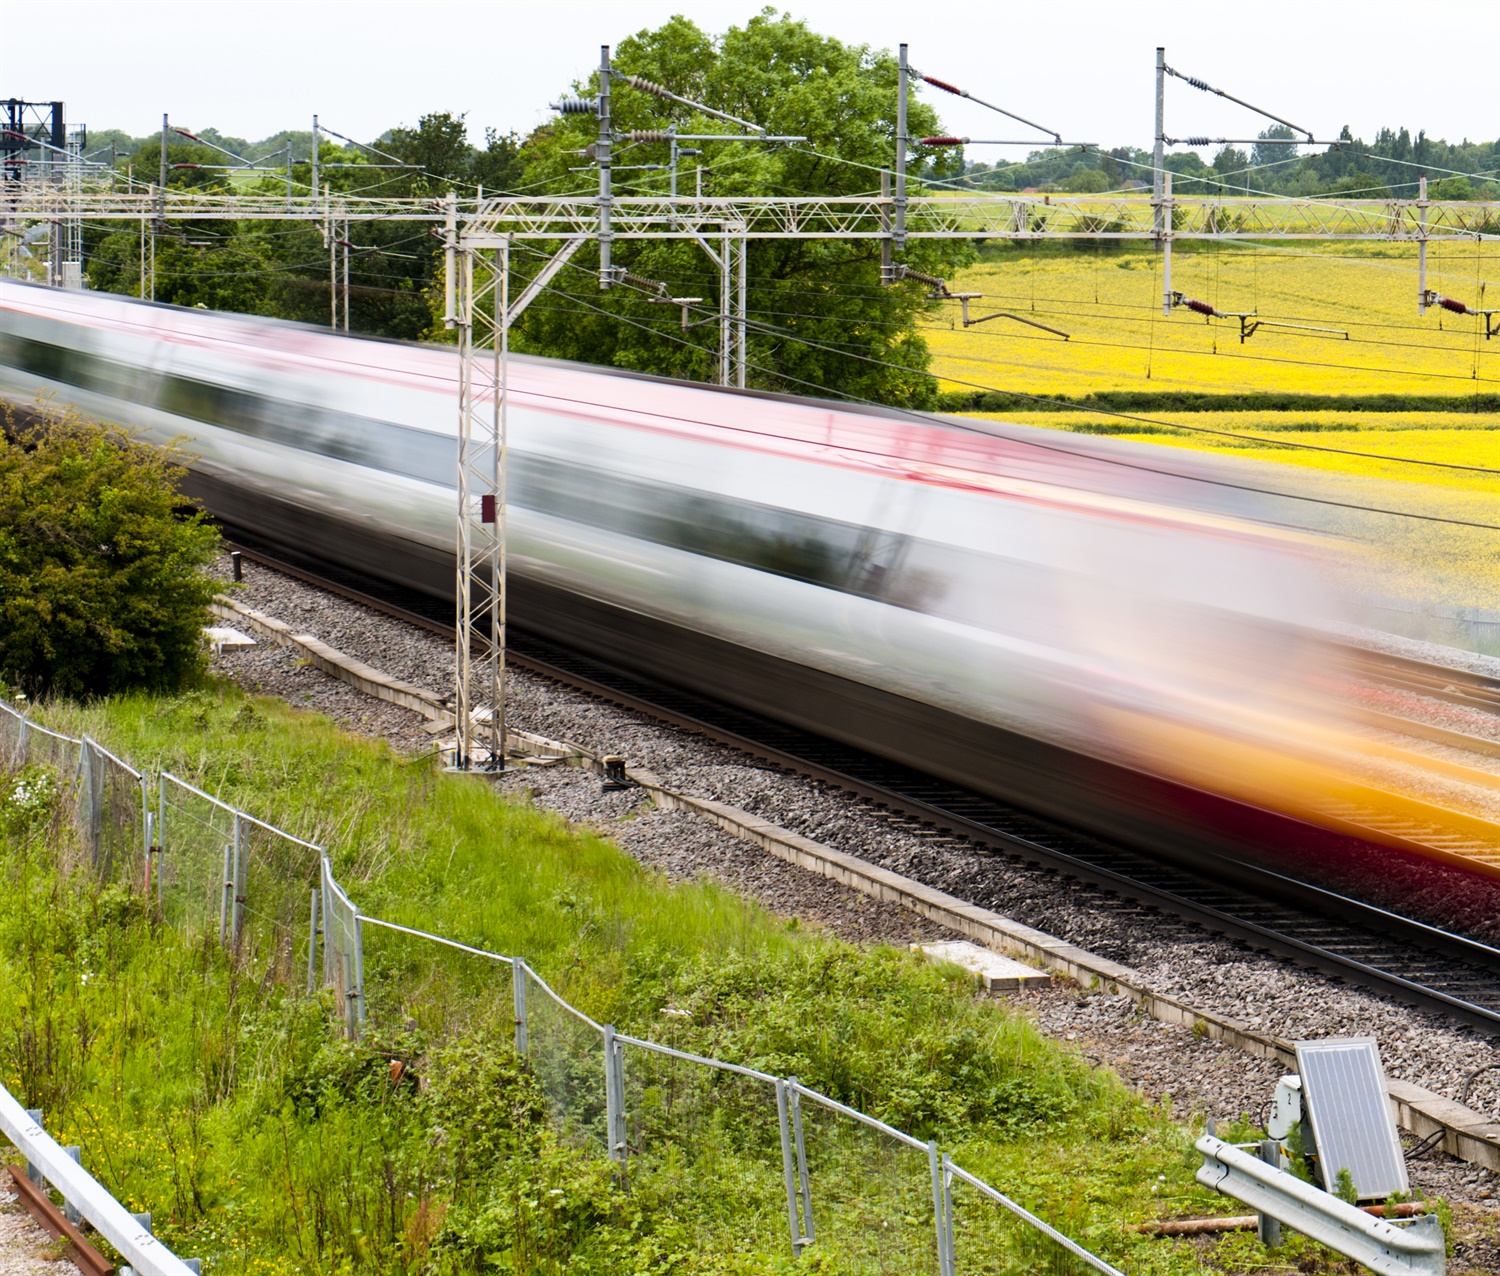 Select committee to decide on amendments to HS2’s northern Phase 2 plan